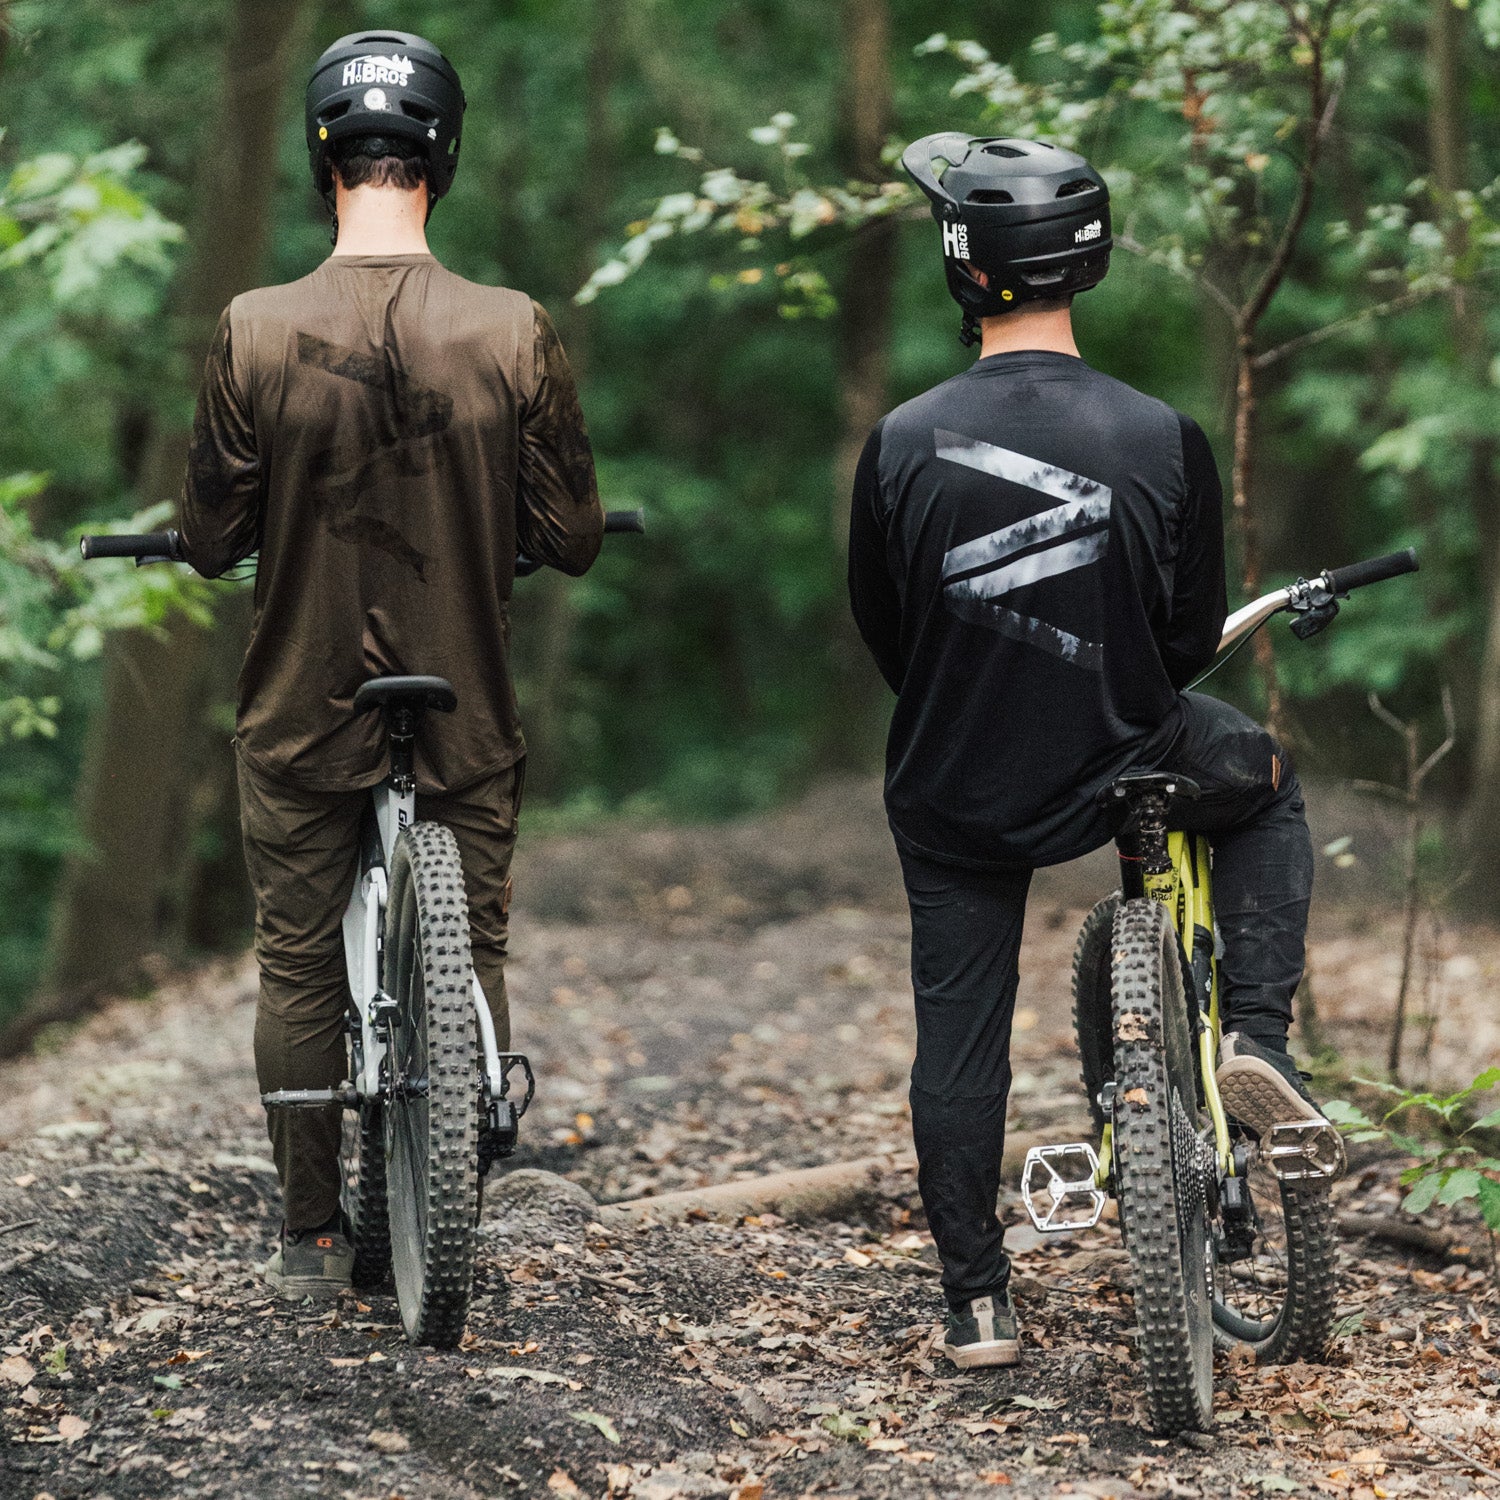 Eco-friendly and durable black downhill mountain bike jersey, featuring long sleeves and flexible fabric for endurance cycling